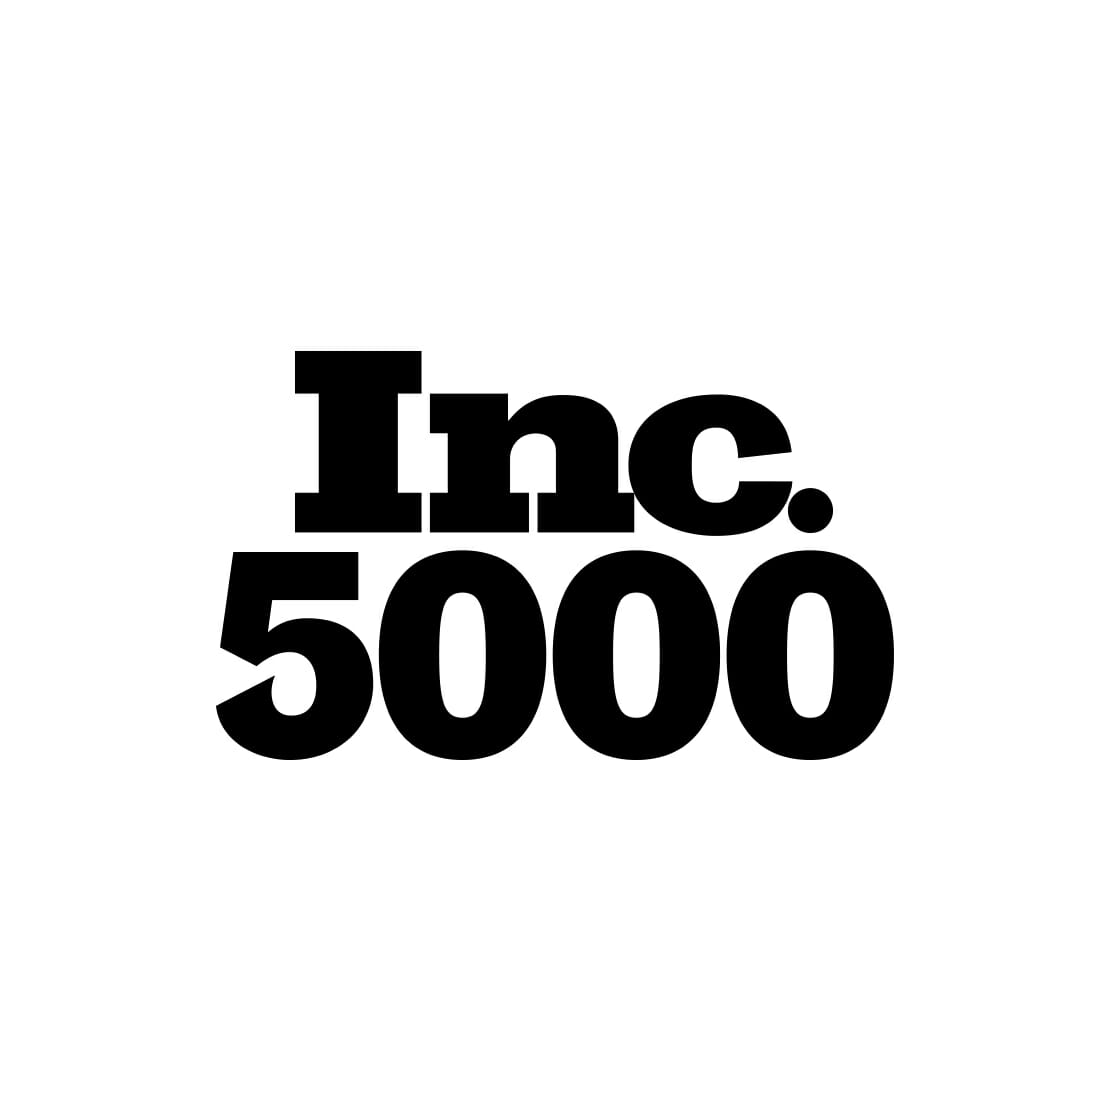 Apploi Named Inc 5000 Top Growing American Company For 3rd Year Running